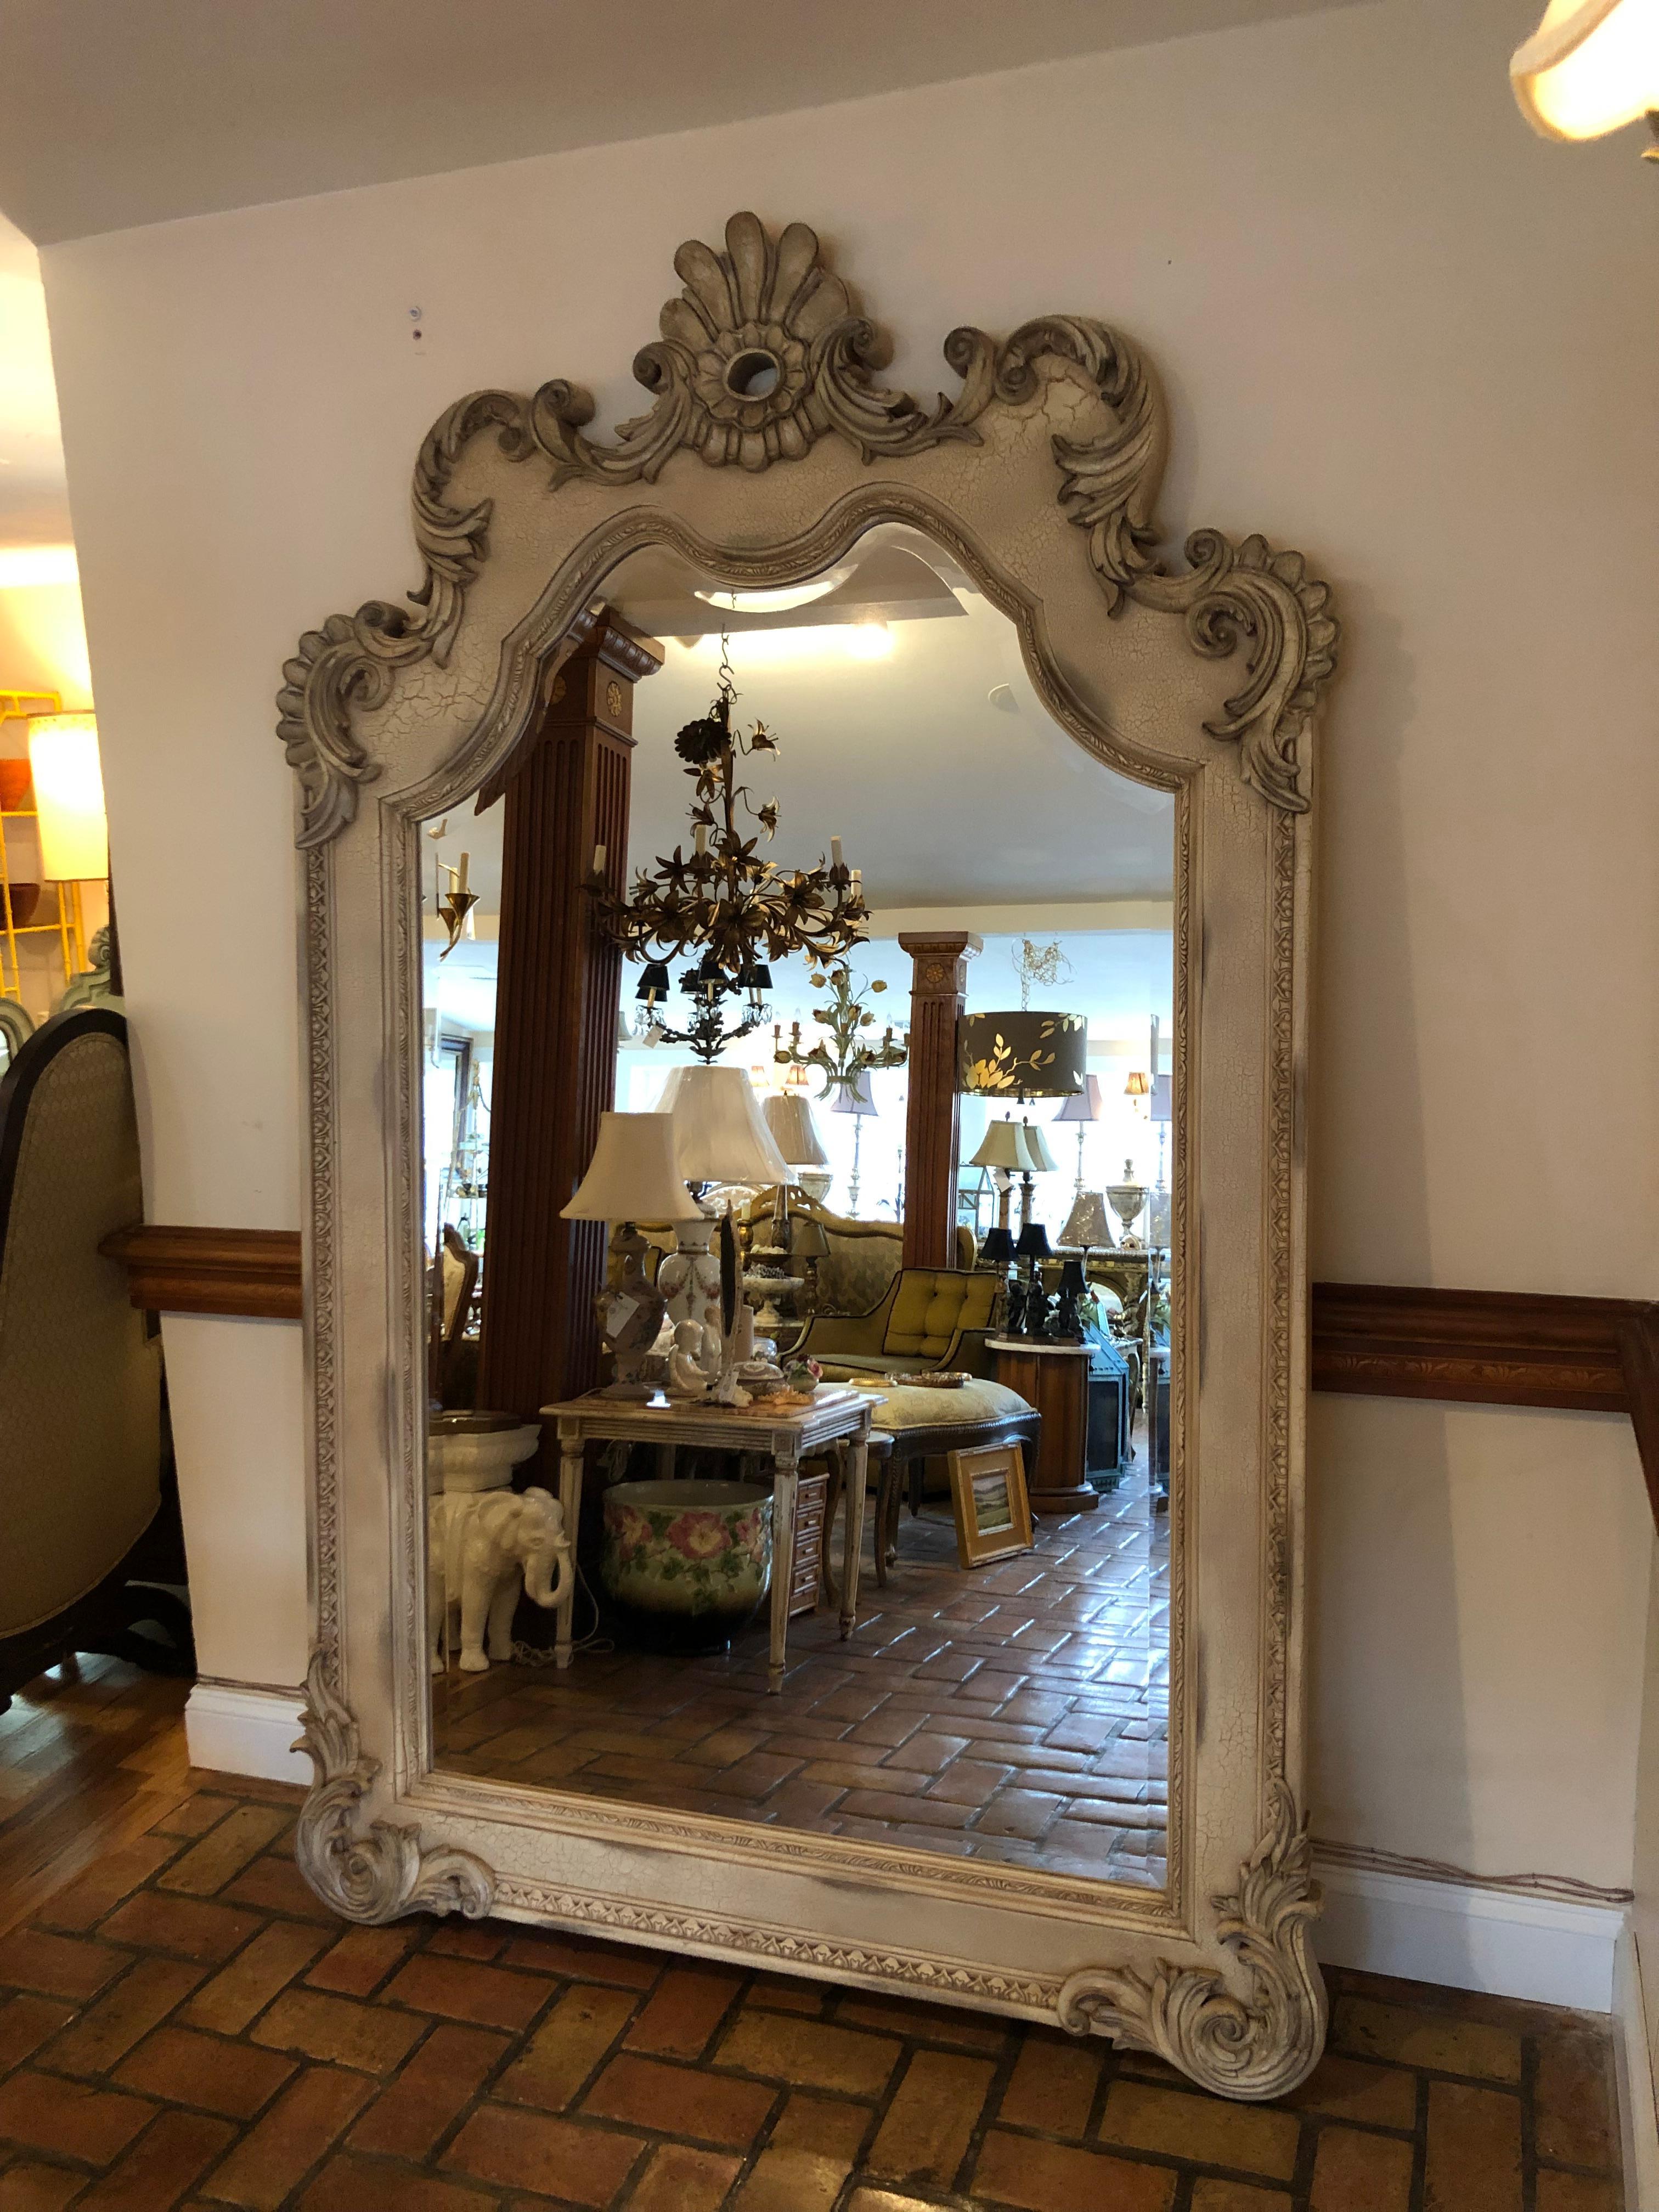 8 ft. Tall Hollywood Regency  leaning or wall mount mirror. Highly ornate with over an inch bevel this cream beauty will light up the room with its details. This mirror will help open up small rooms by reflecting light. Use in a dressing room or a